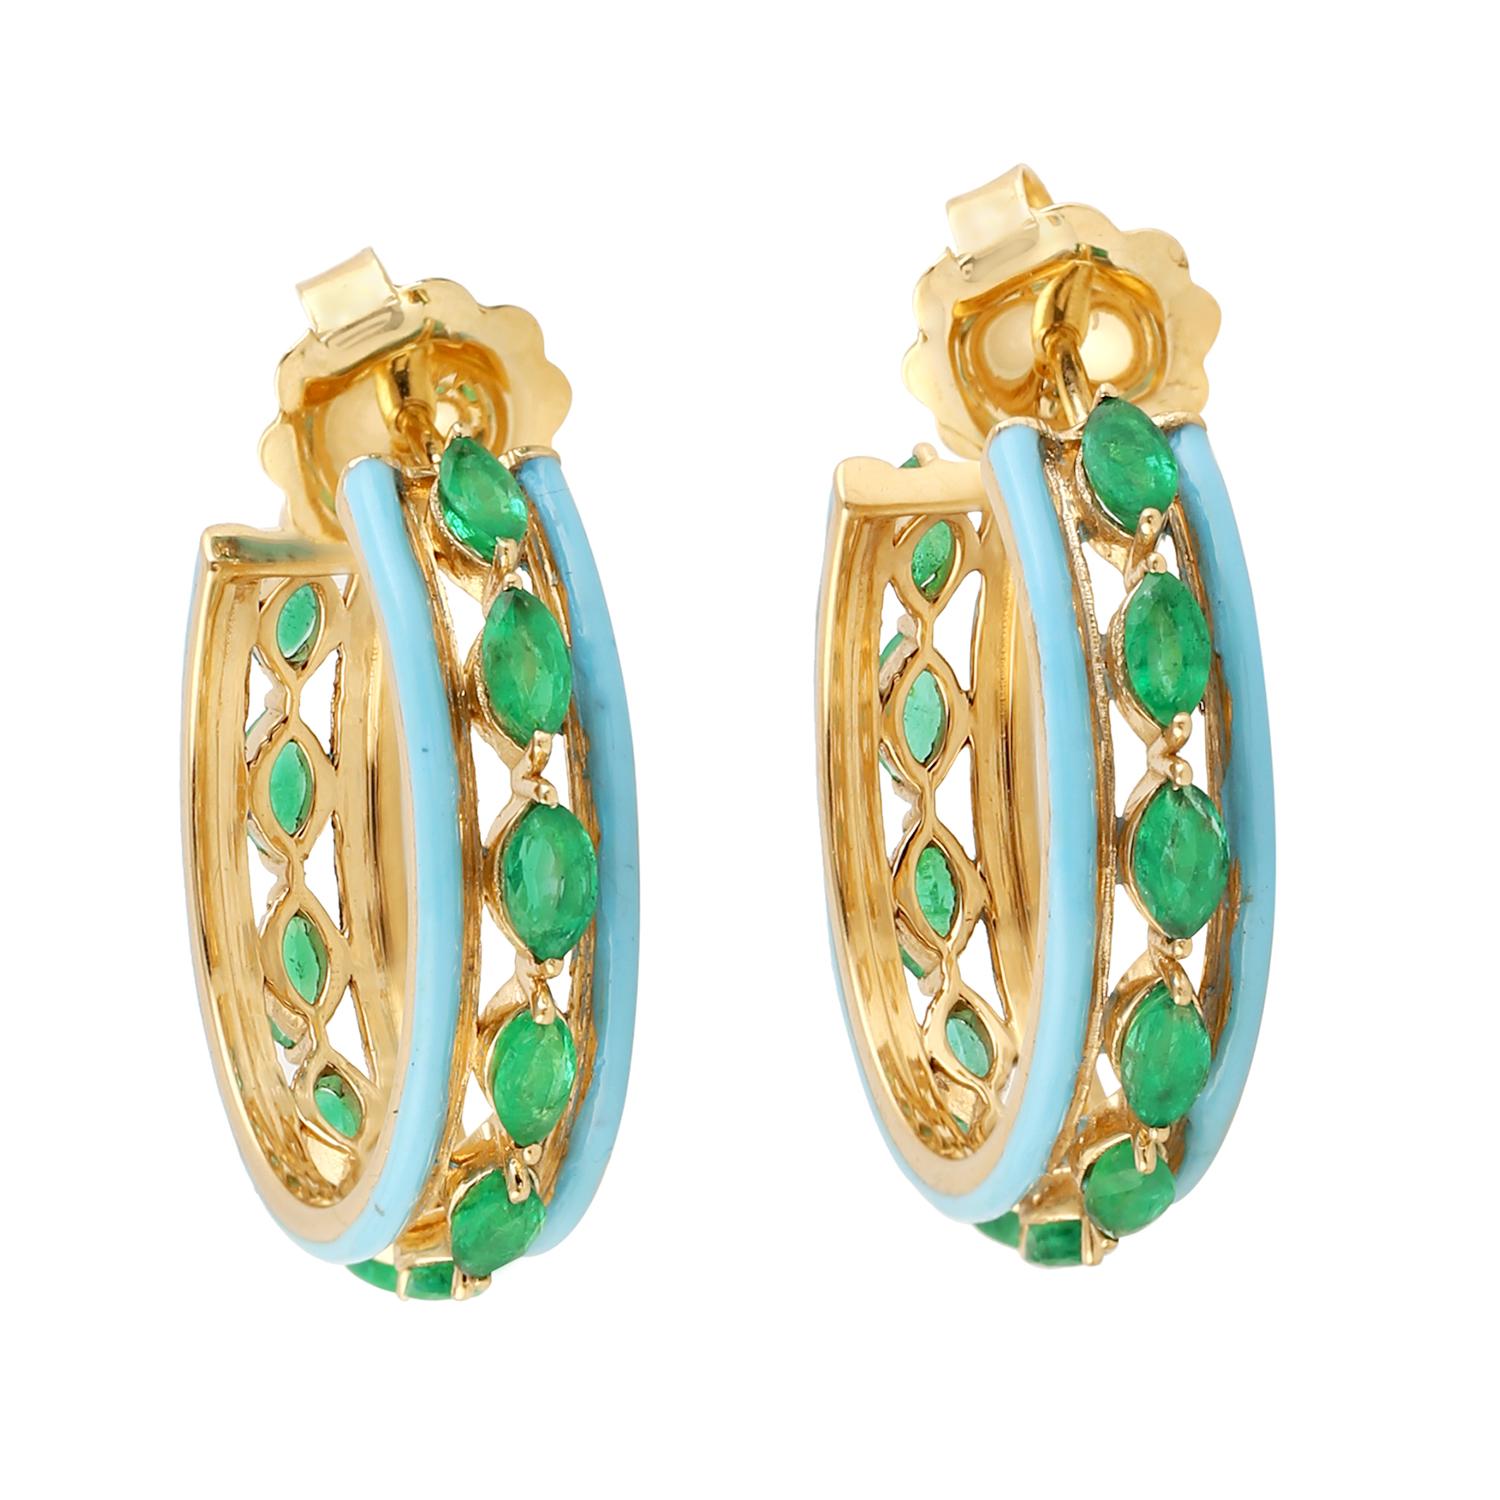 These stunning earrings are thoughtfully and meticulously crafted in 14-karat gold. It is set in turquoise enamel and 3.06 carats emerald.

FOLLOW  MEGHNA JEWELS storefront to view the latest collection & exclusive pieces.  Meghna Jewels is proudly